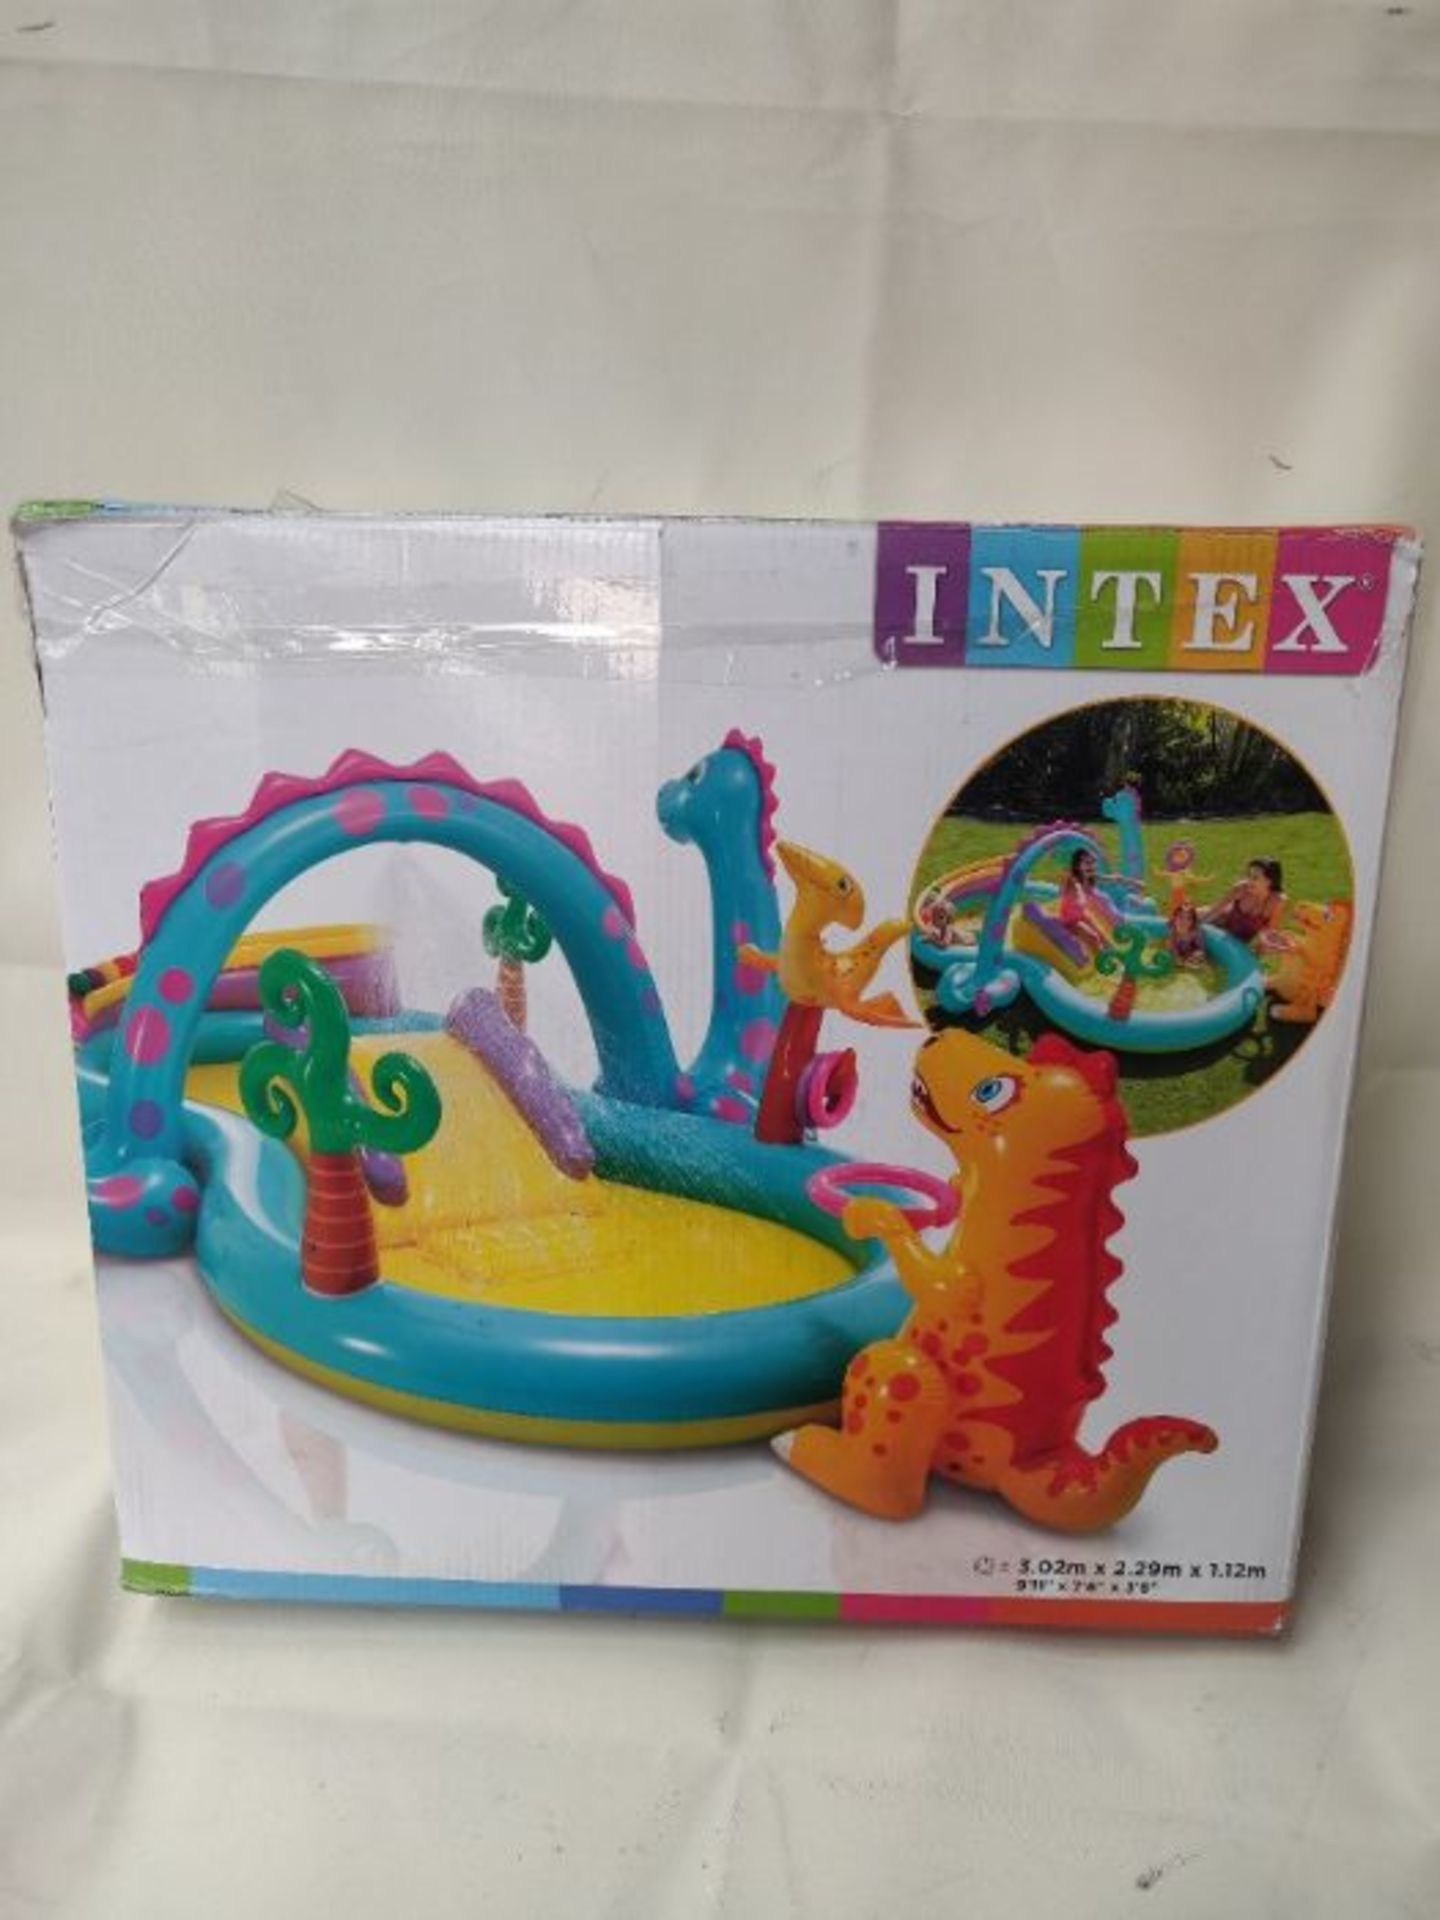 Intex-57135NP Dinoland Play Center-Inflatable water play center, assorted model (with - Image 2 of 3